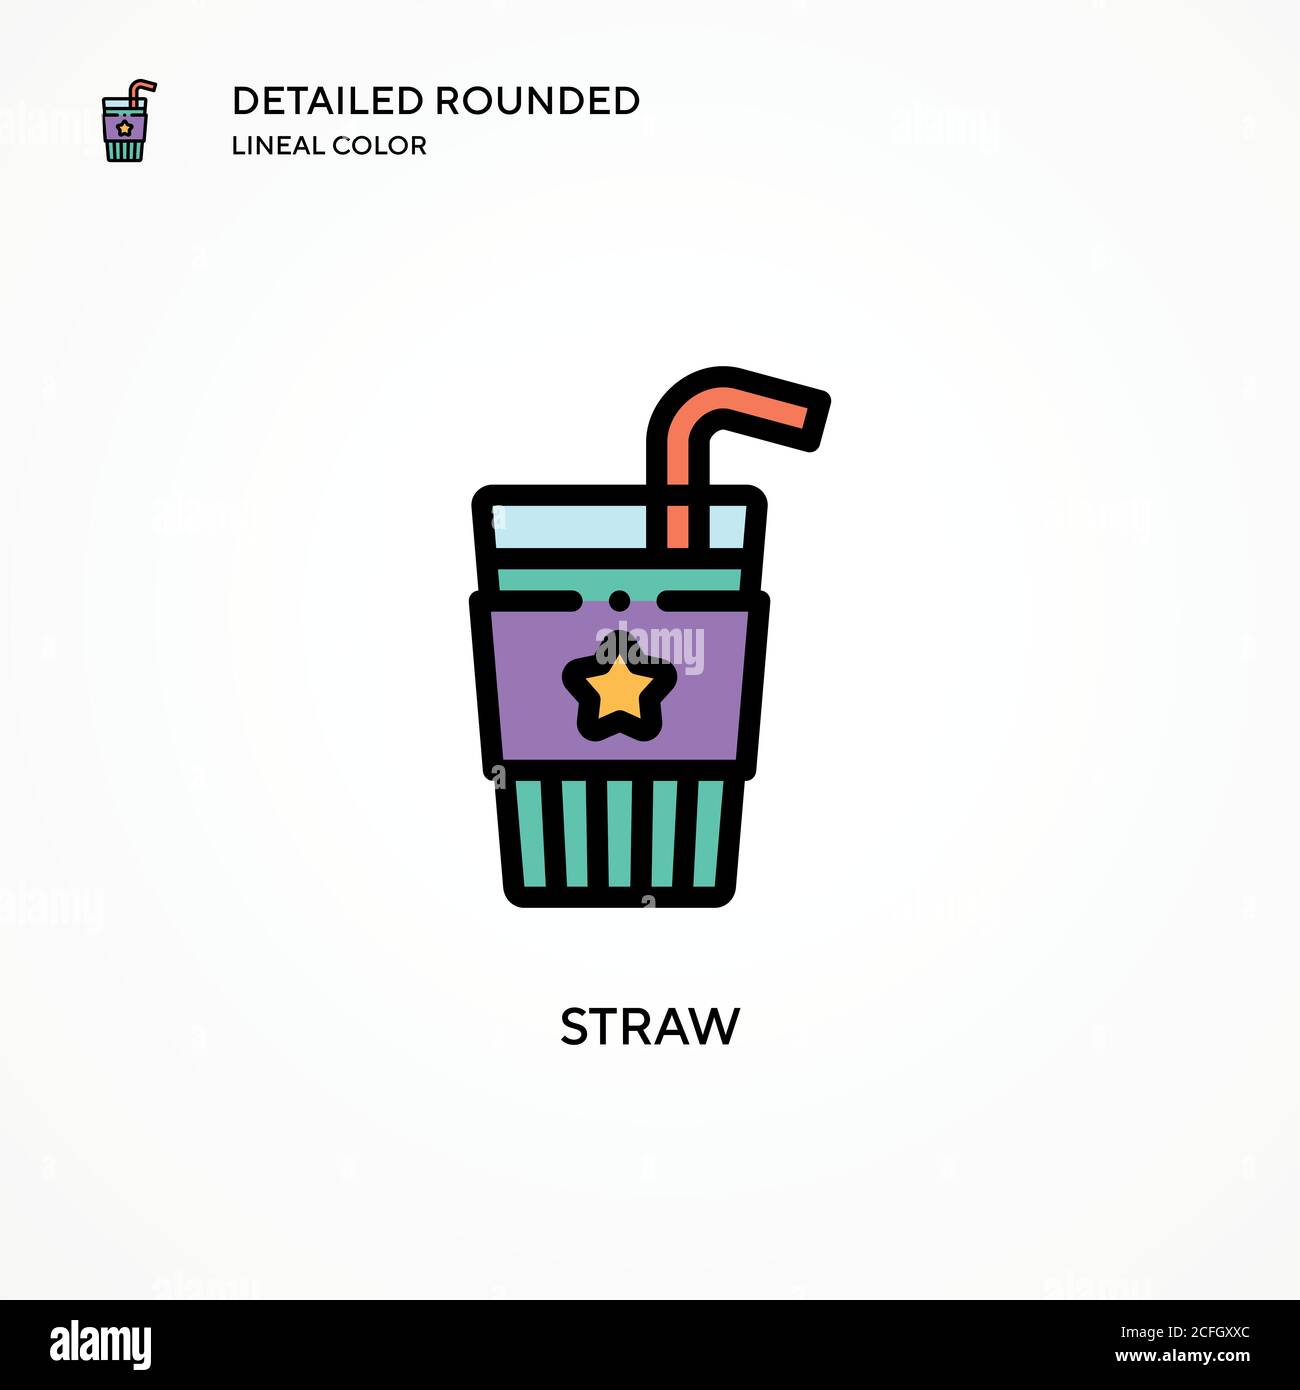 Straw vector icon. Modern vector illustration concepts. Easy to edit and customize. Stock Vector